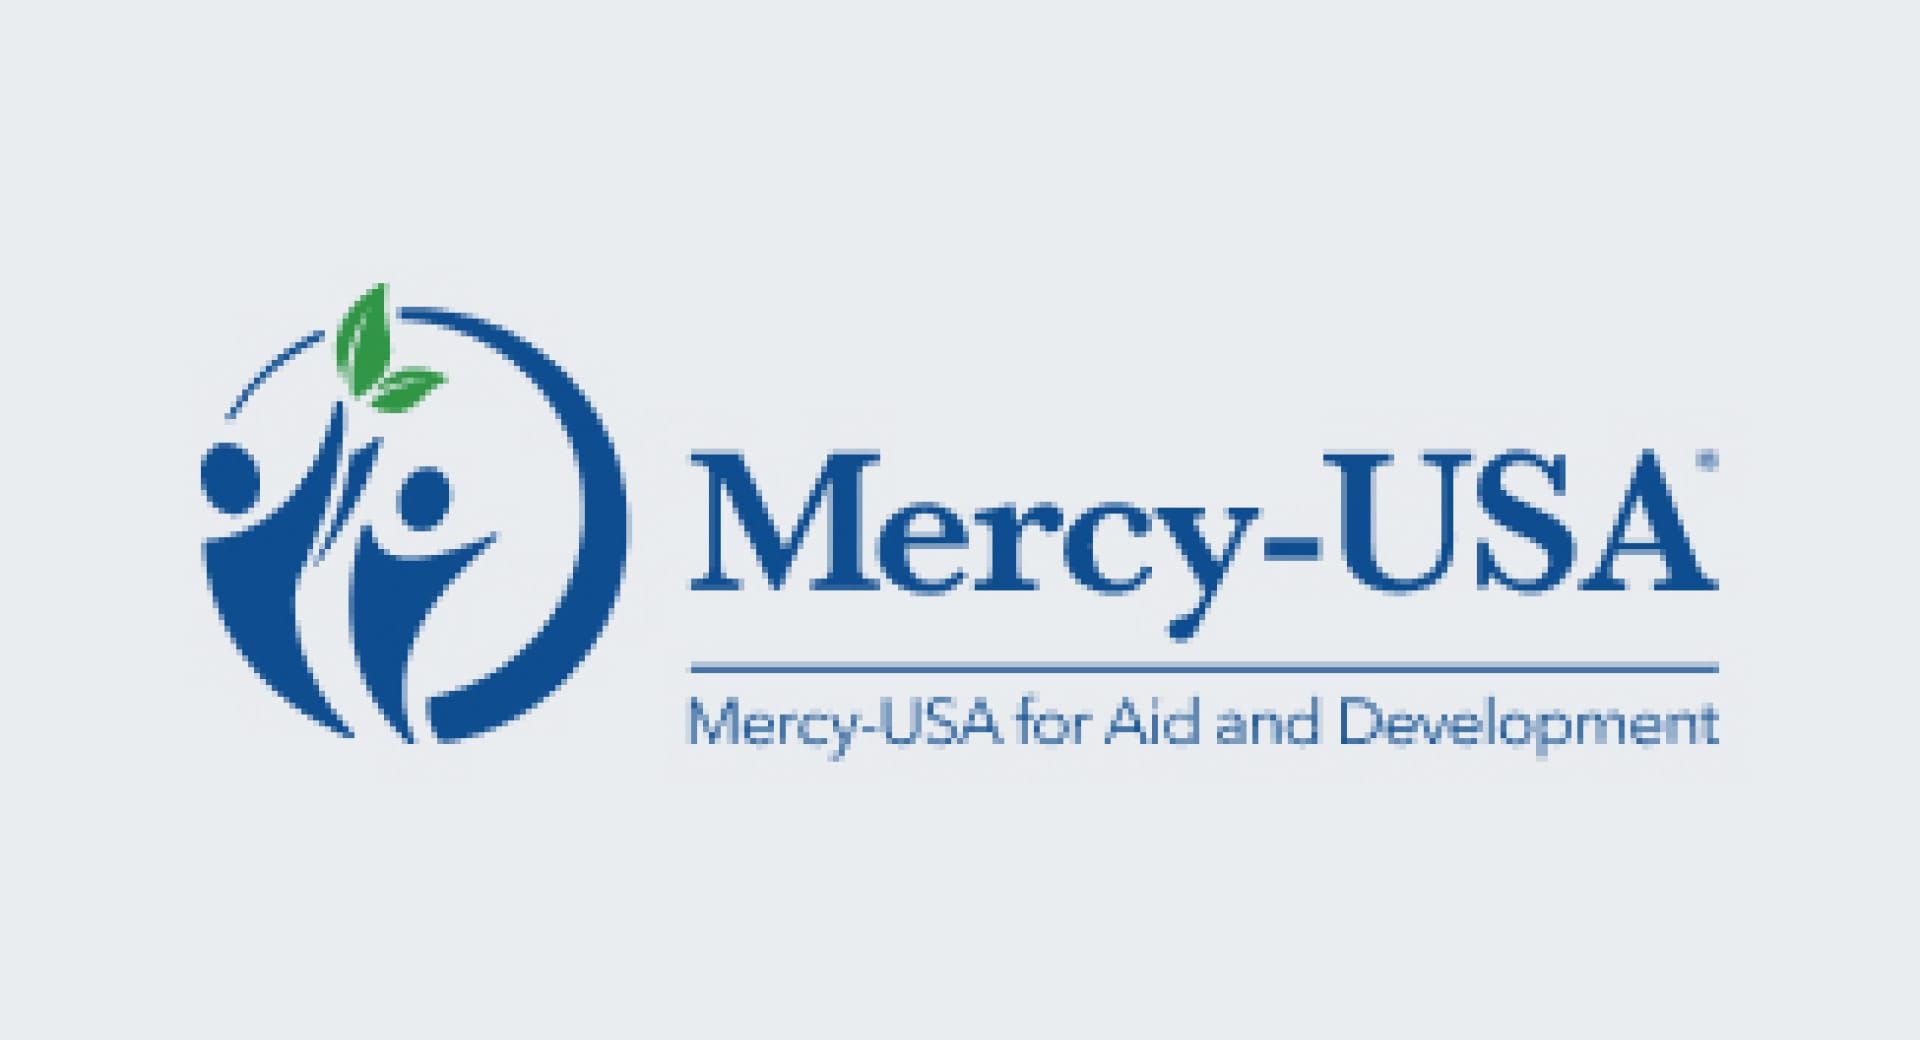 Syria: Mercy-USA & UNOCHA provide insulated shelter homes to save lives in heat wave